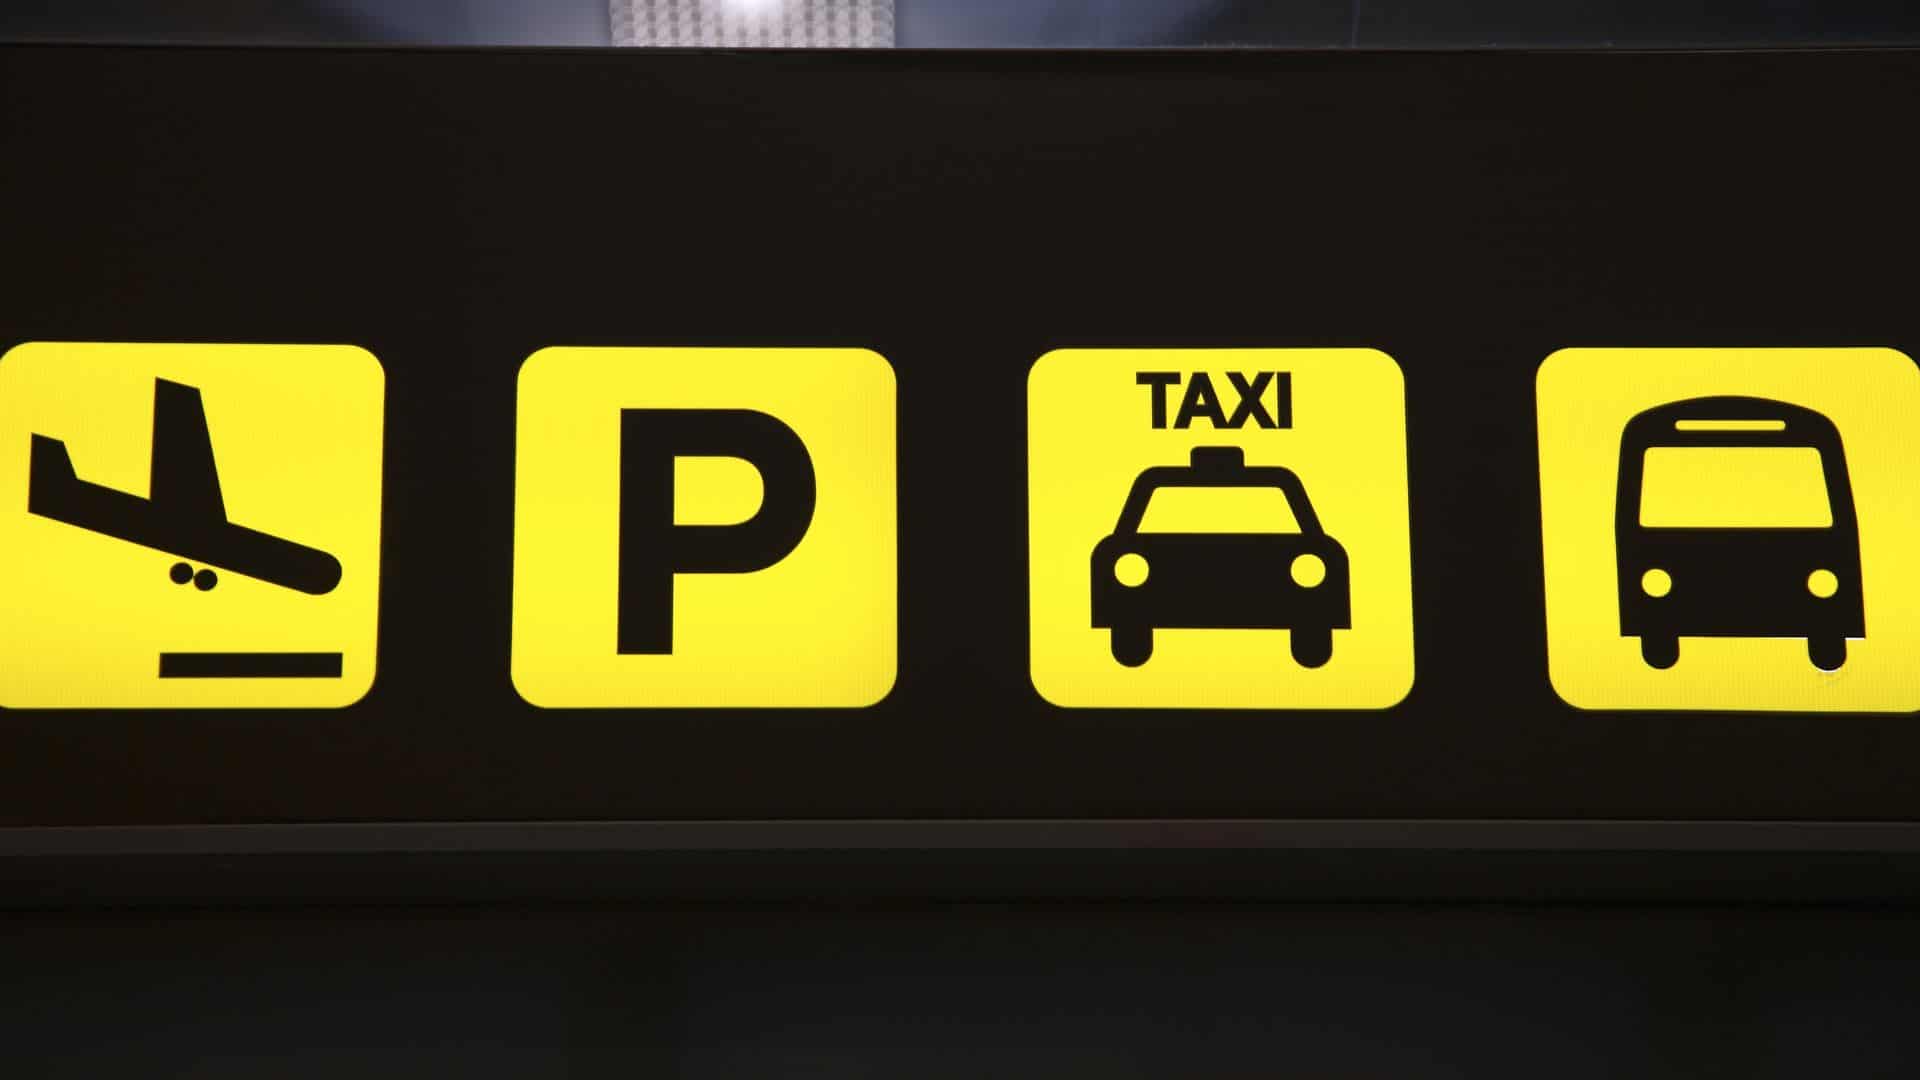 An airport transport sign with yellow icons.